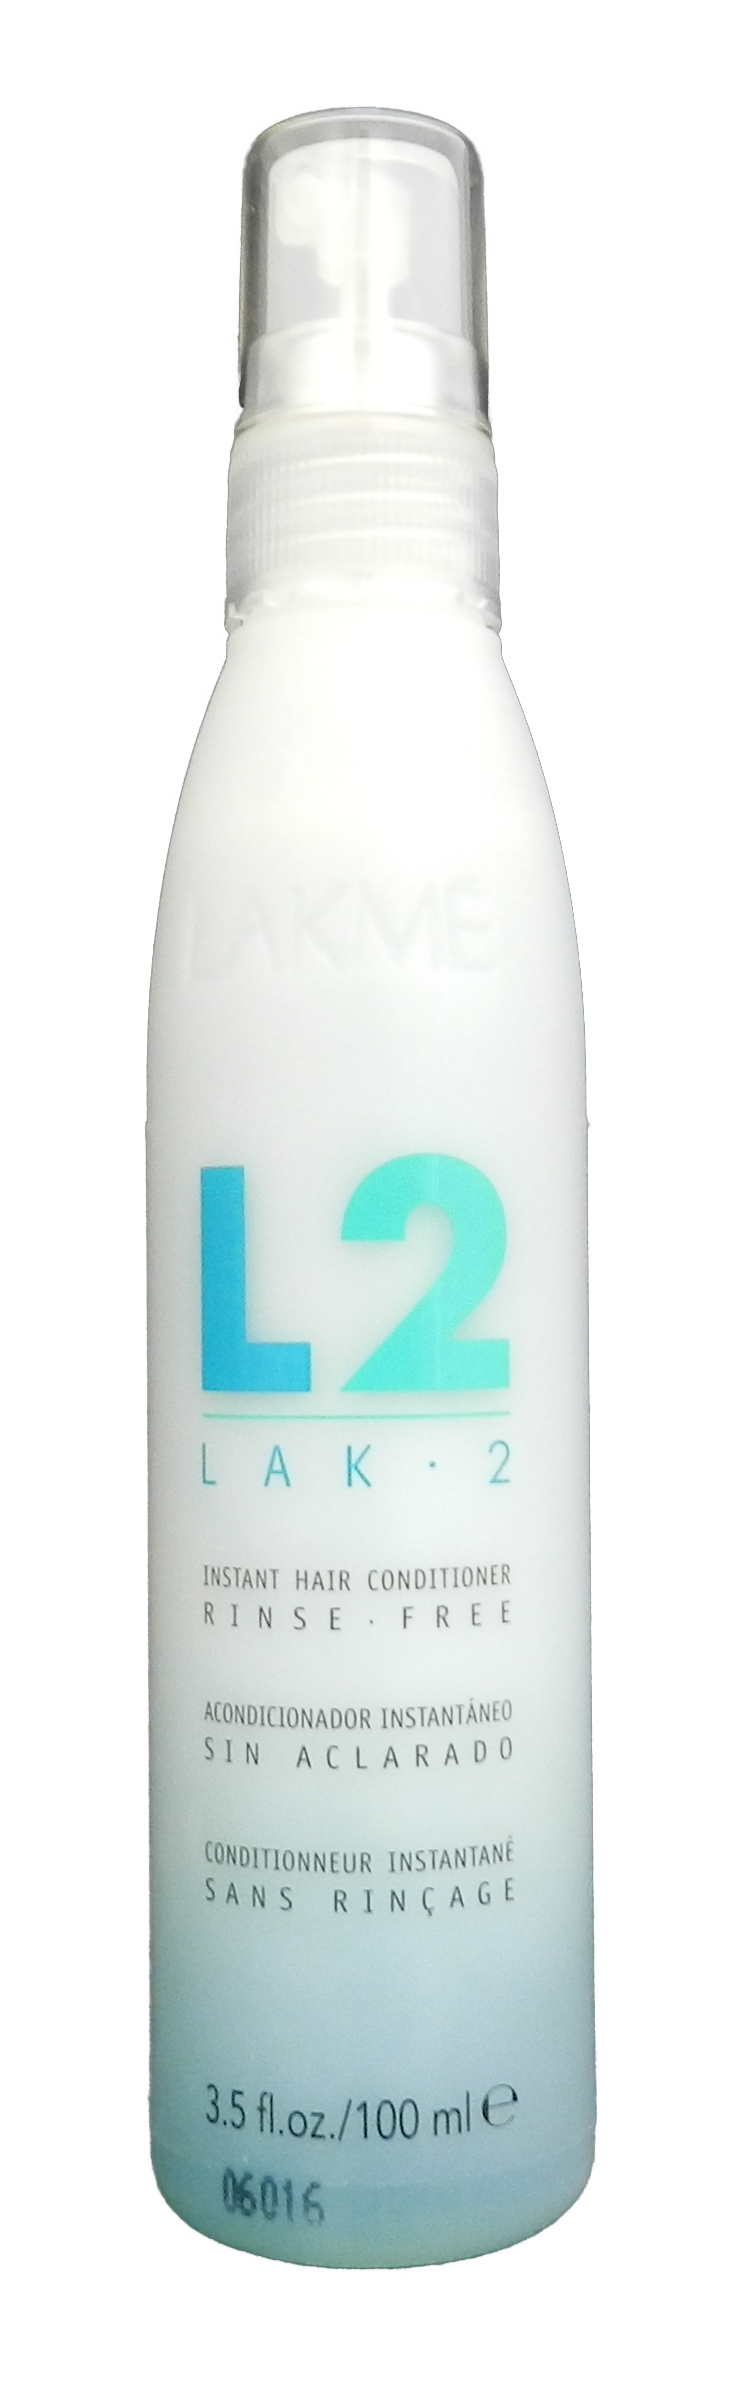 Lakme Lak 2 Instant Hair Conditioner 3.5 Ounce - image 1 of 1